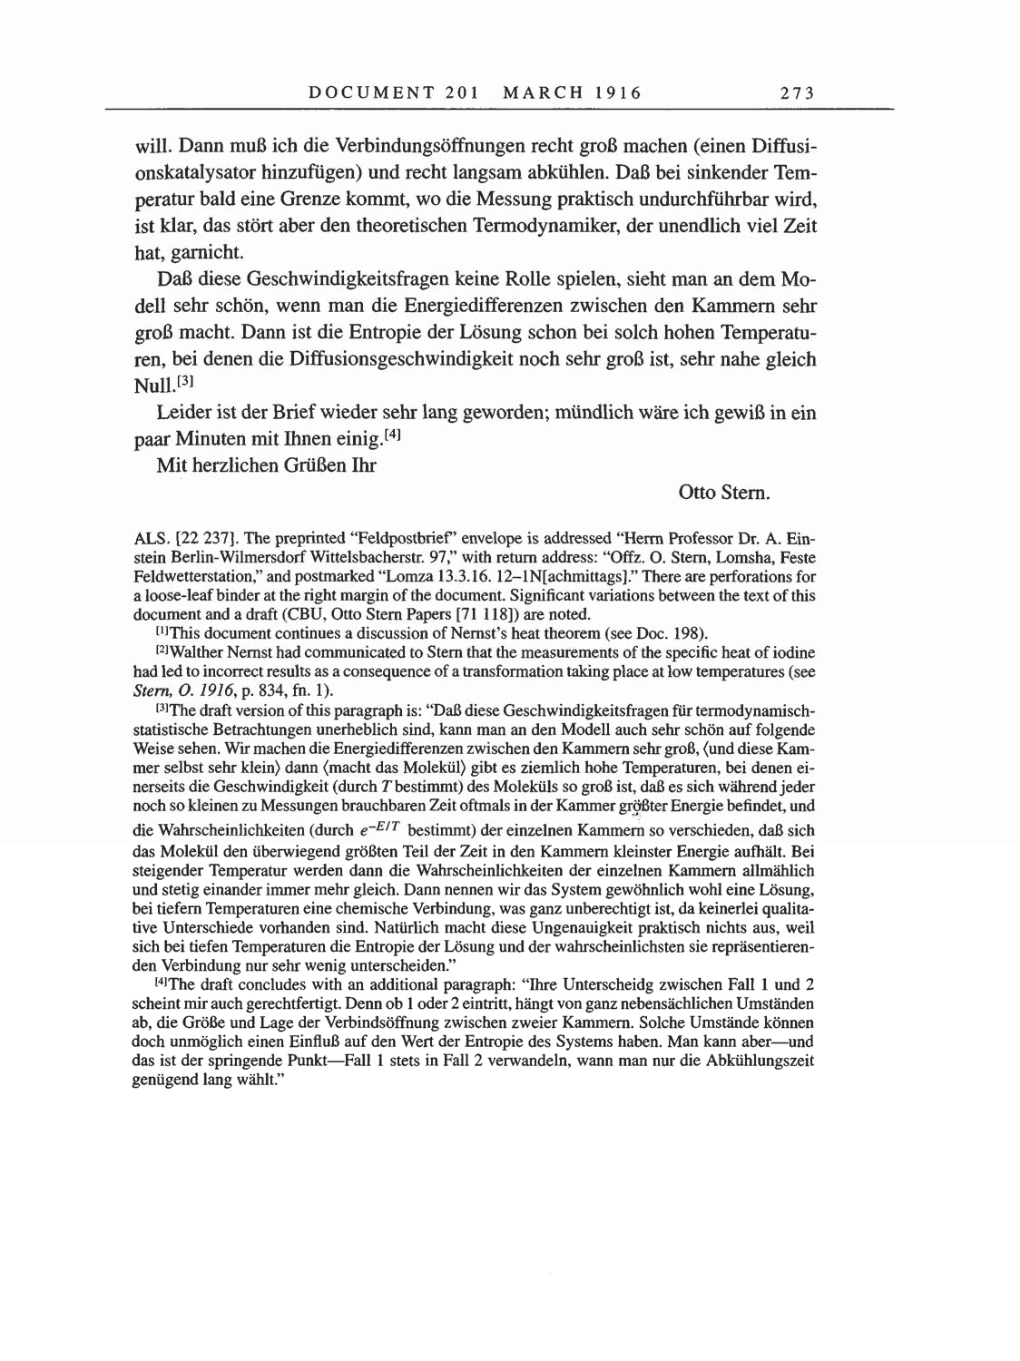 Volume 8, Part A: The Berlin Years: Correspondence 1914-1917 page 273